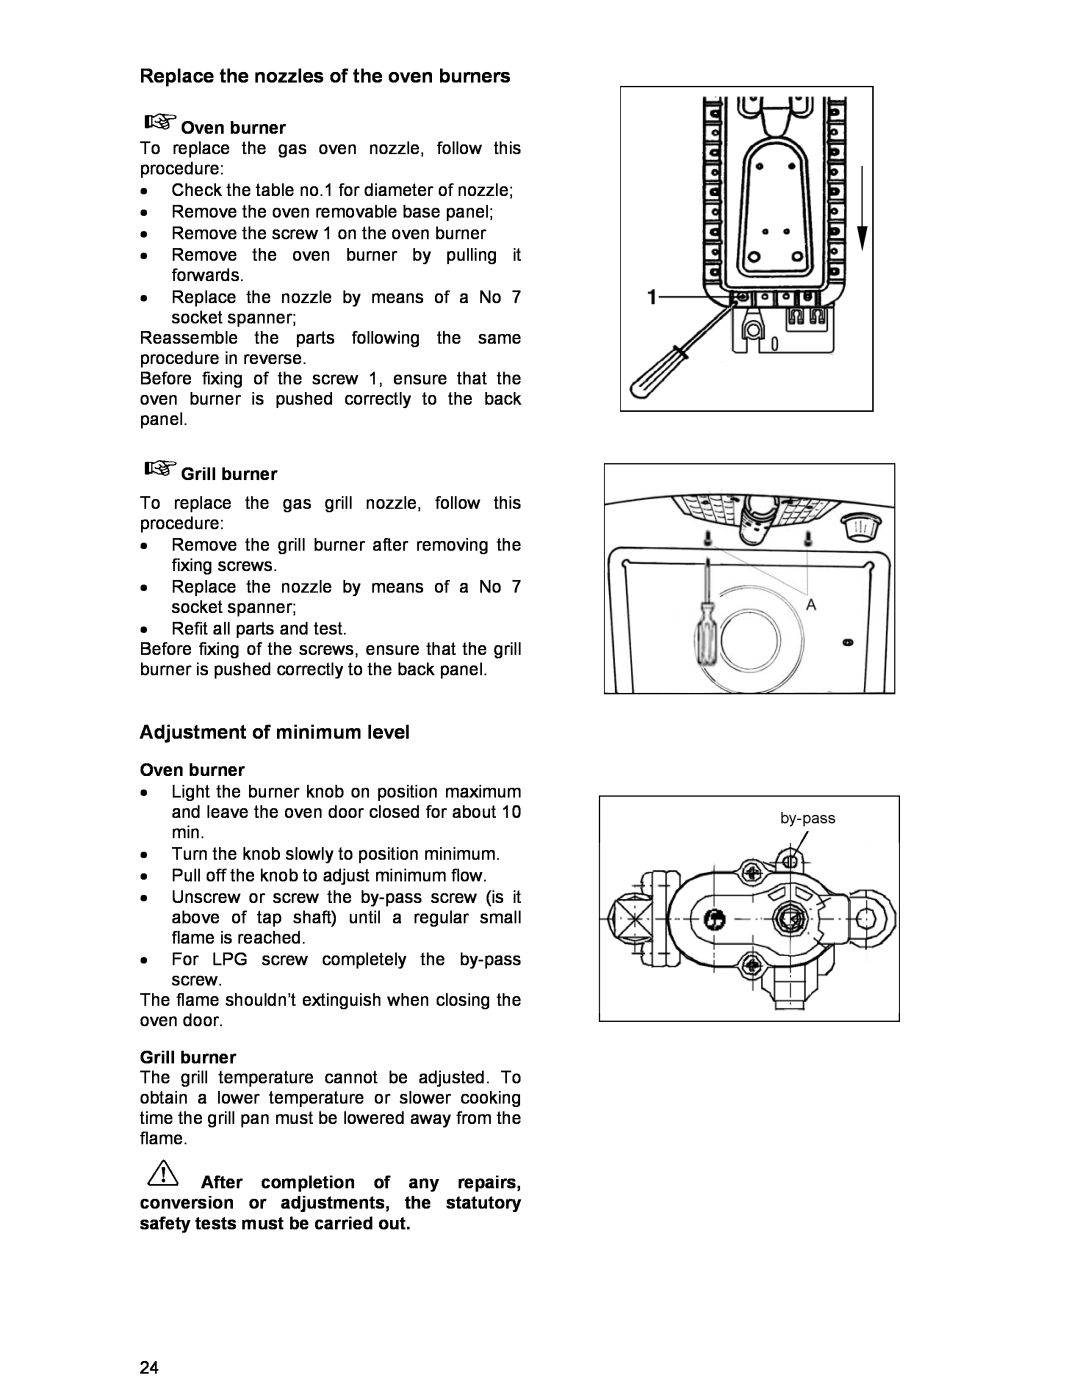 Electrolux DSO51GA manual Replace the nozzles of the oven burners, Adjustment of minimum level, by-pass 